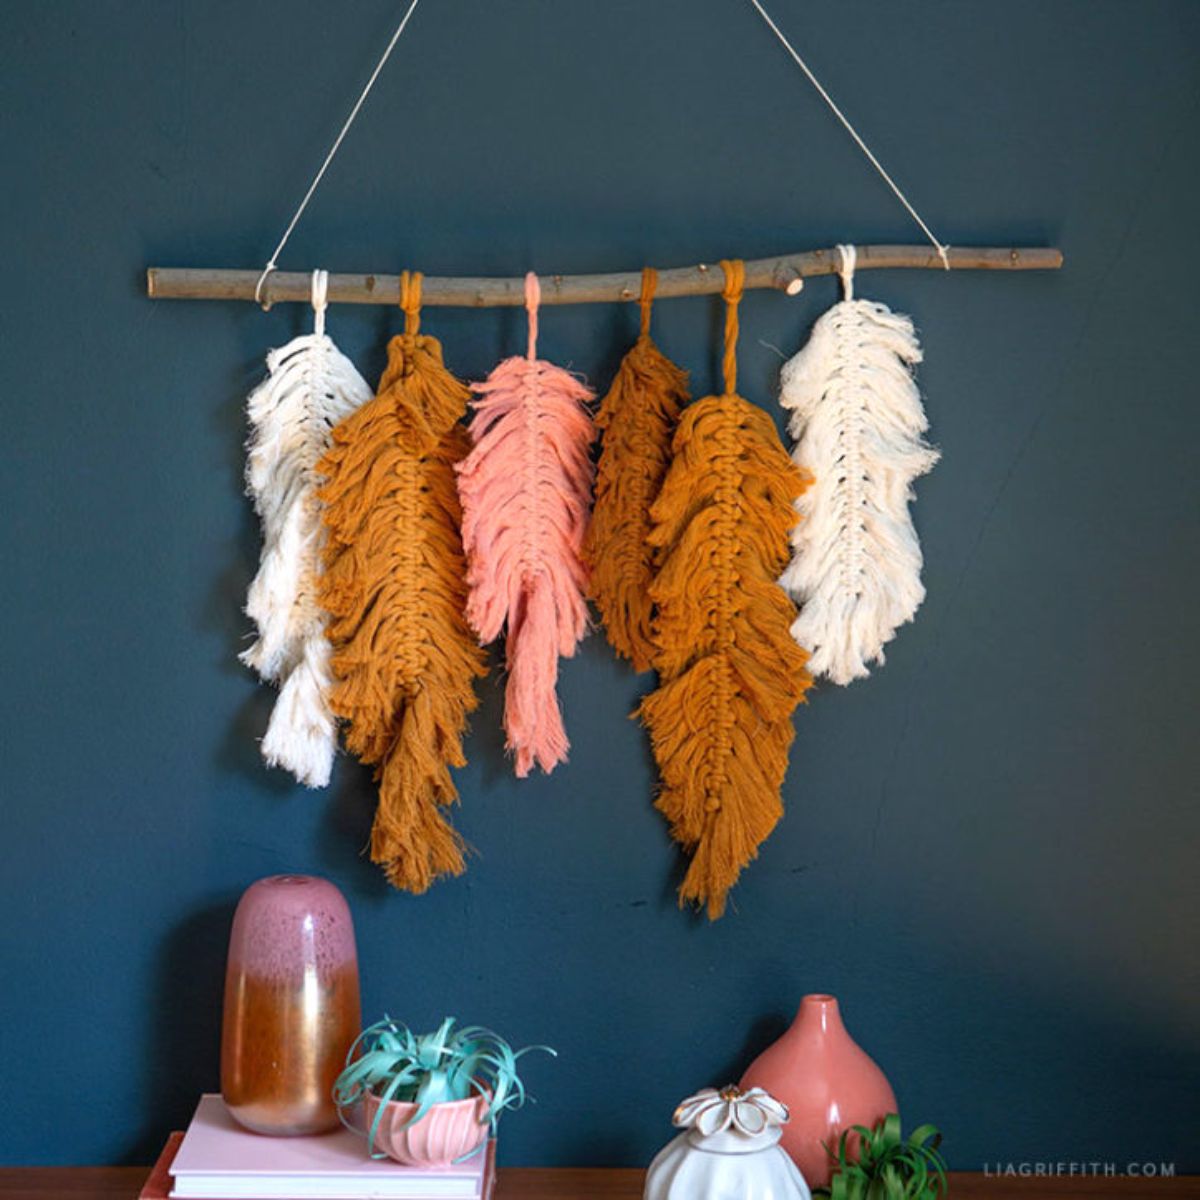 How to Make a Macrame Wall Hanging with Wood Beads - Lia Griffith